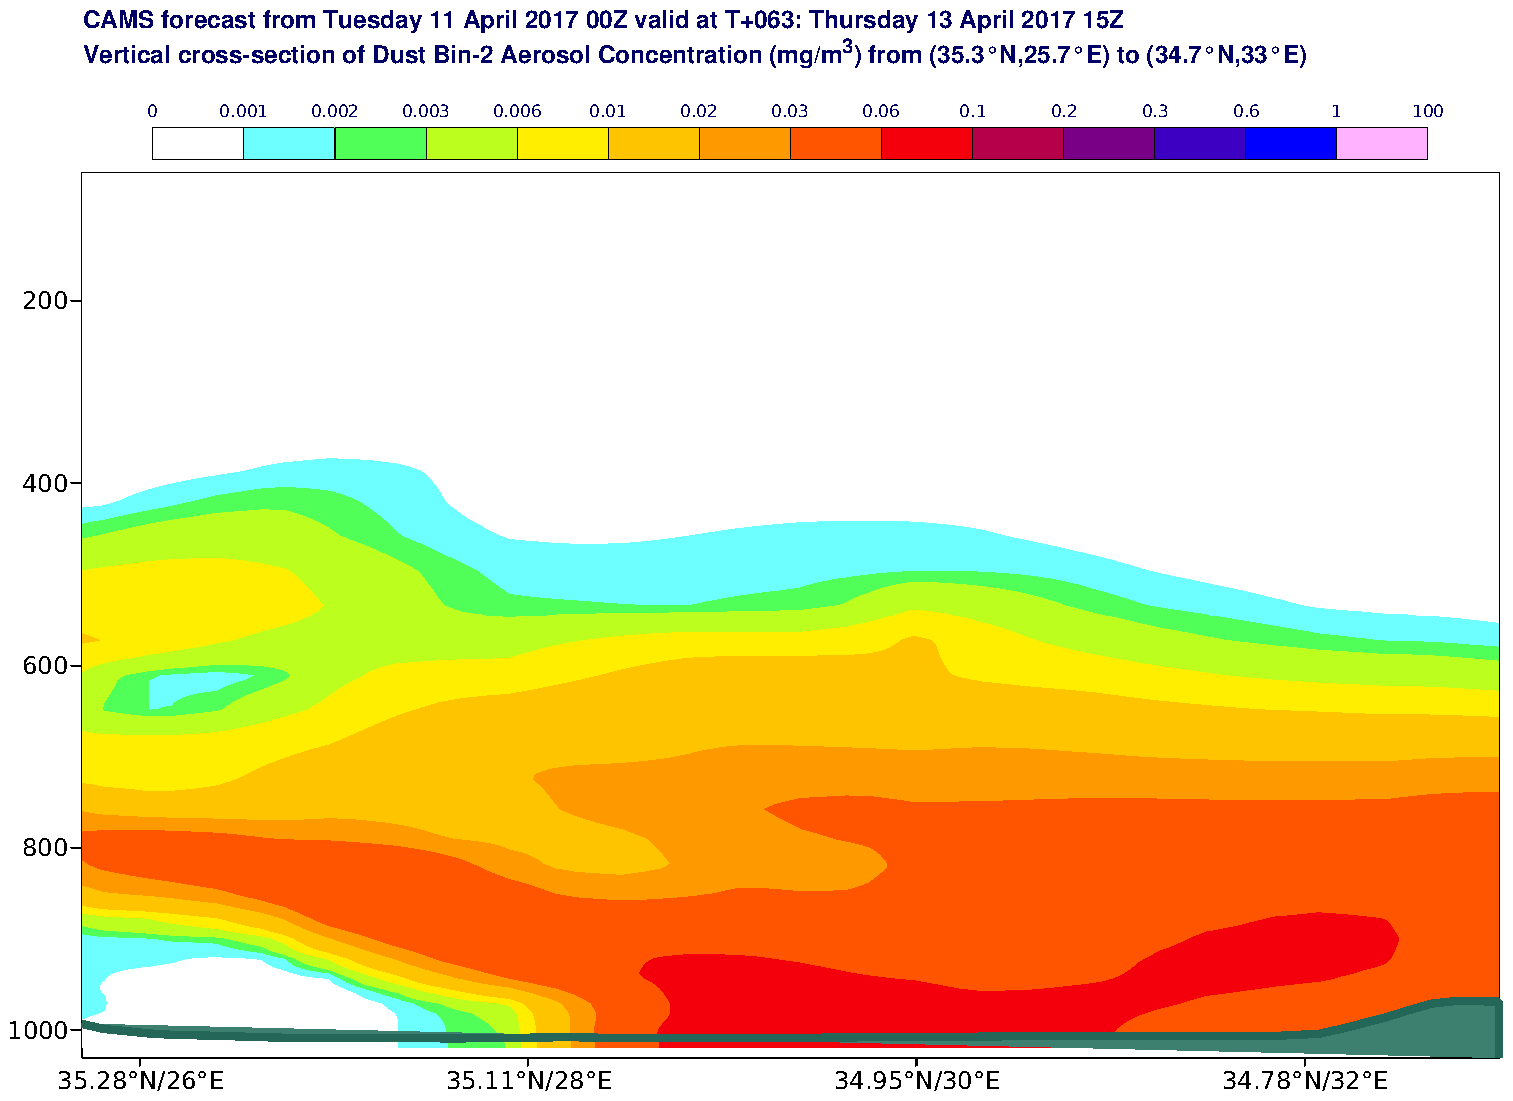 Vertical cross-section of Dust Bin-2 Aerosol Concentration (mg/m3) valid at T63 - 2017-04-13 15:00